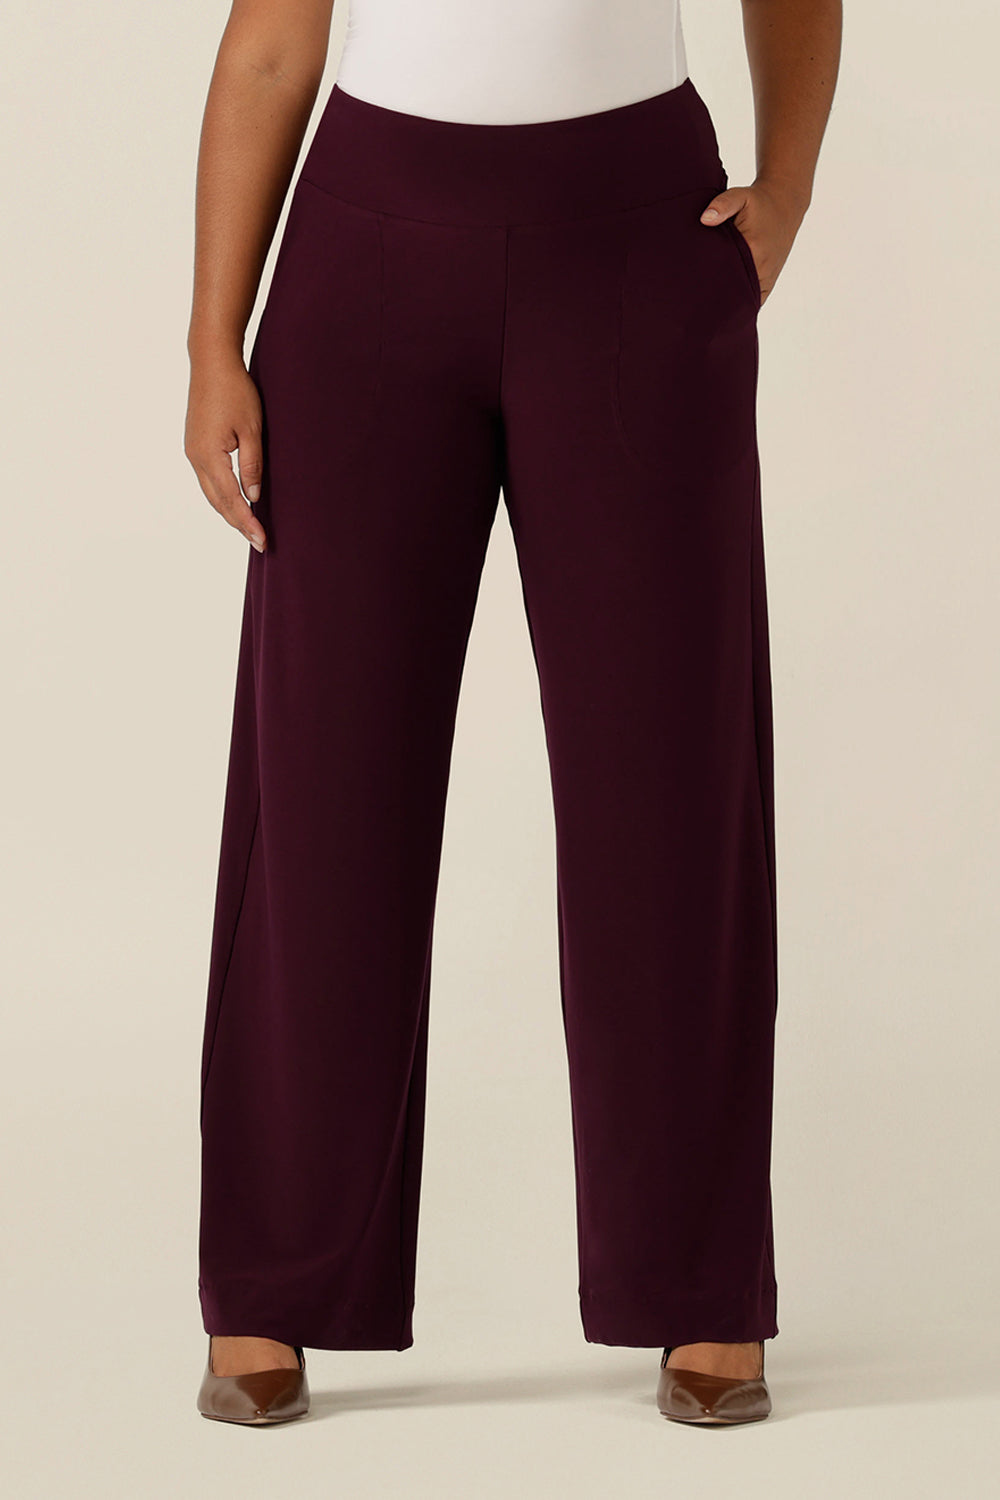 A close up of an Australian-made wide leg, full length Mulberry red jersey pant in size 12. By Australian and New Zealand women's clothes brand, L&F these wide leg work pants promise to be a comfortable office trouser for sizes 8 to size 24. 